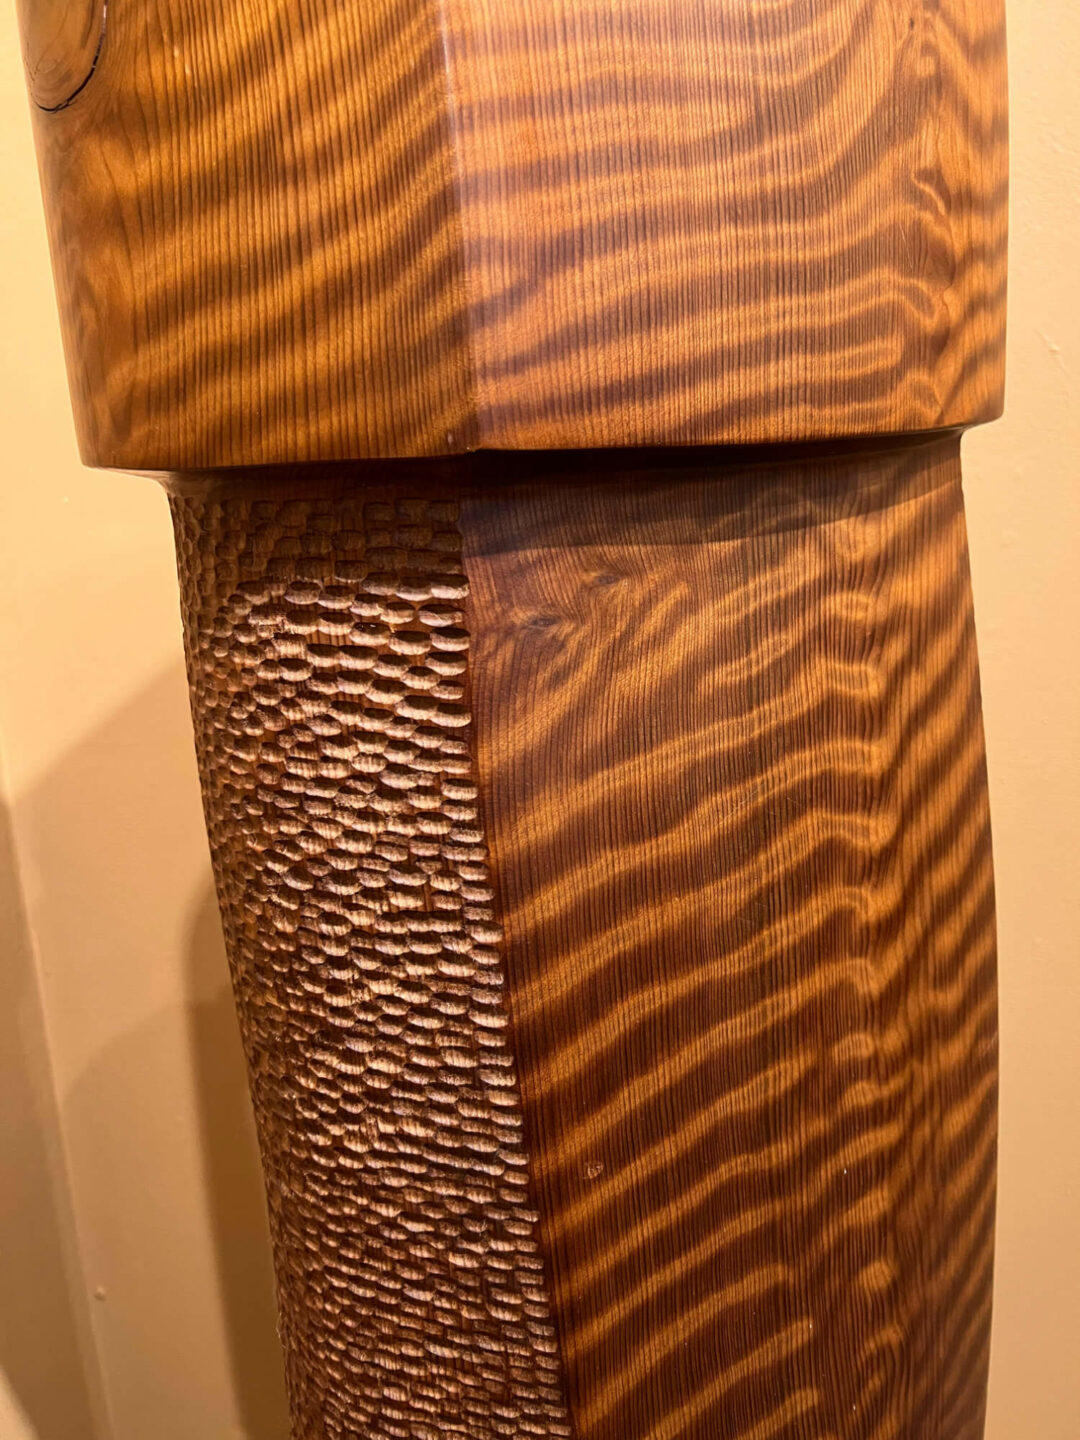 Bruce Mitchell - SENTINEL [detail] - 2009 - Curly redwood - 55in × 12.5in × 7.25in